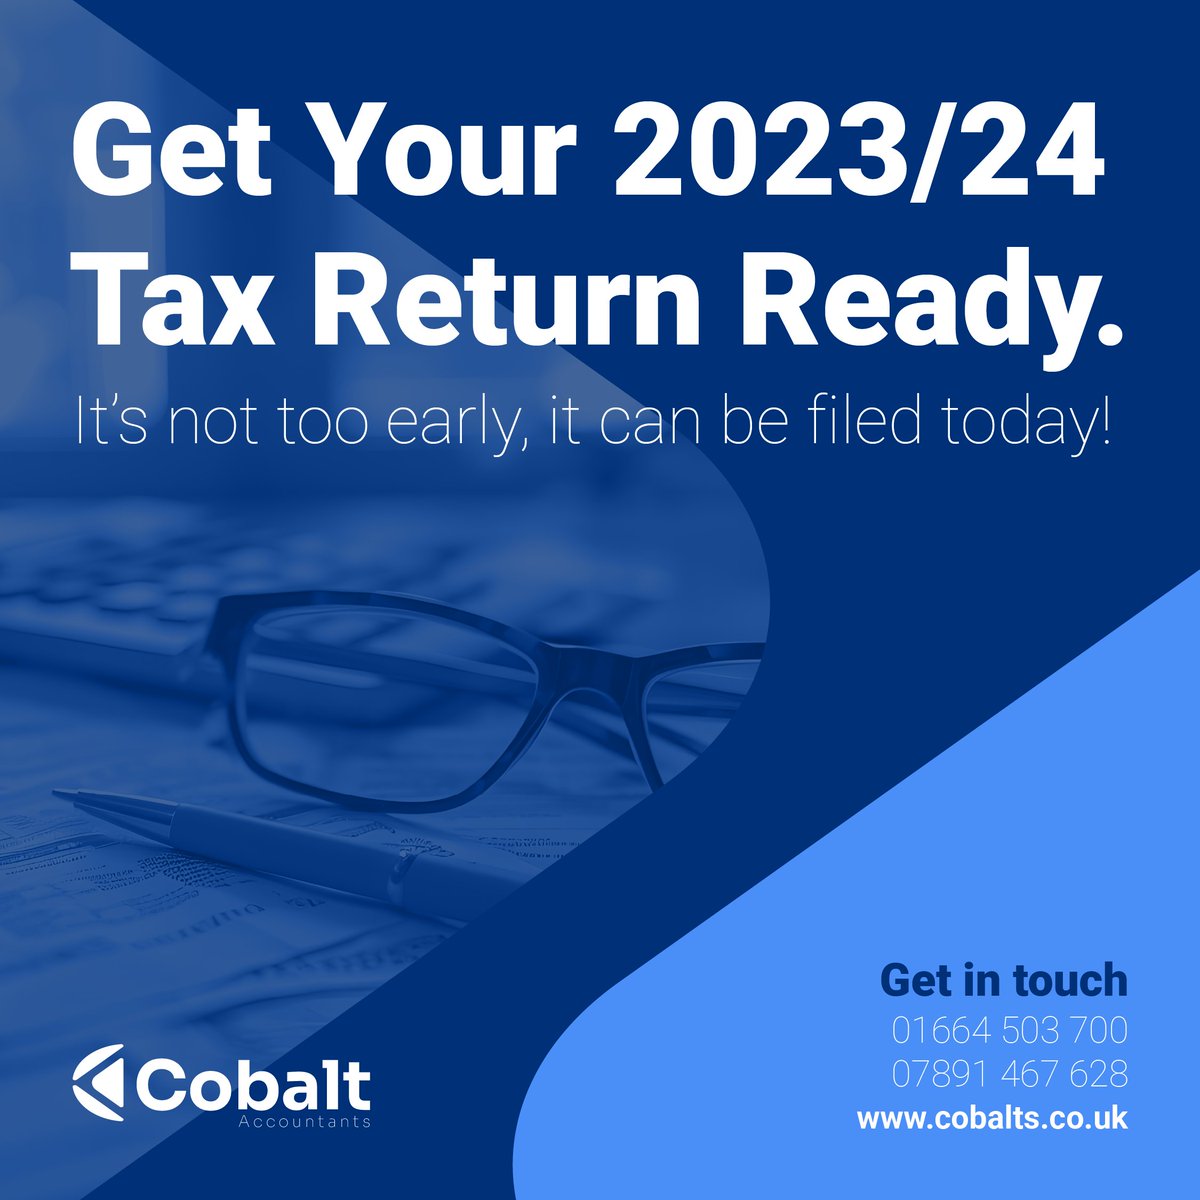 🚀 Get ahead of the game with #CobaltAccountants! 🌟

Don't wait until the last minute—you can start preparing your 2023/24 #SelfAssessment tax returns now. Our team is ready to make the process smooth and stress-free. 💼📈